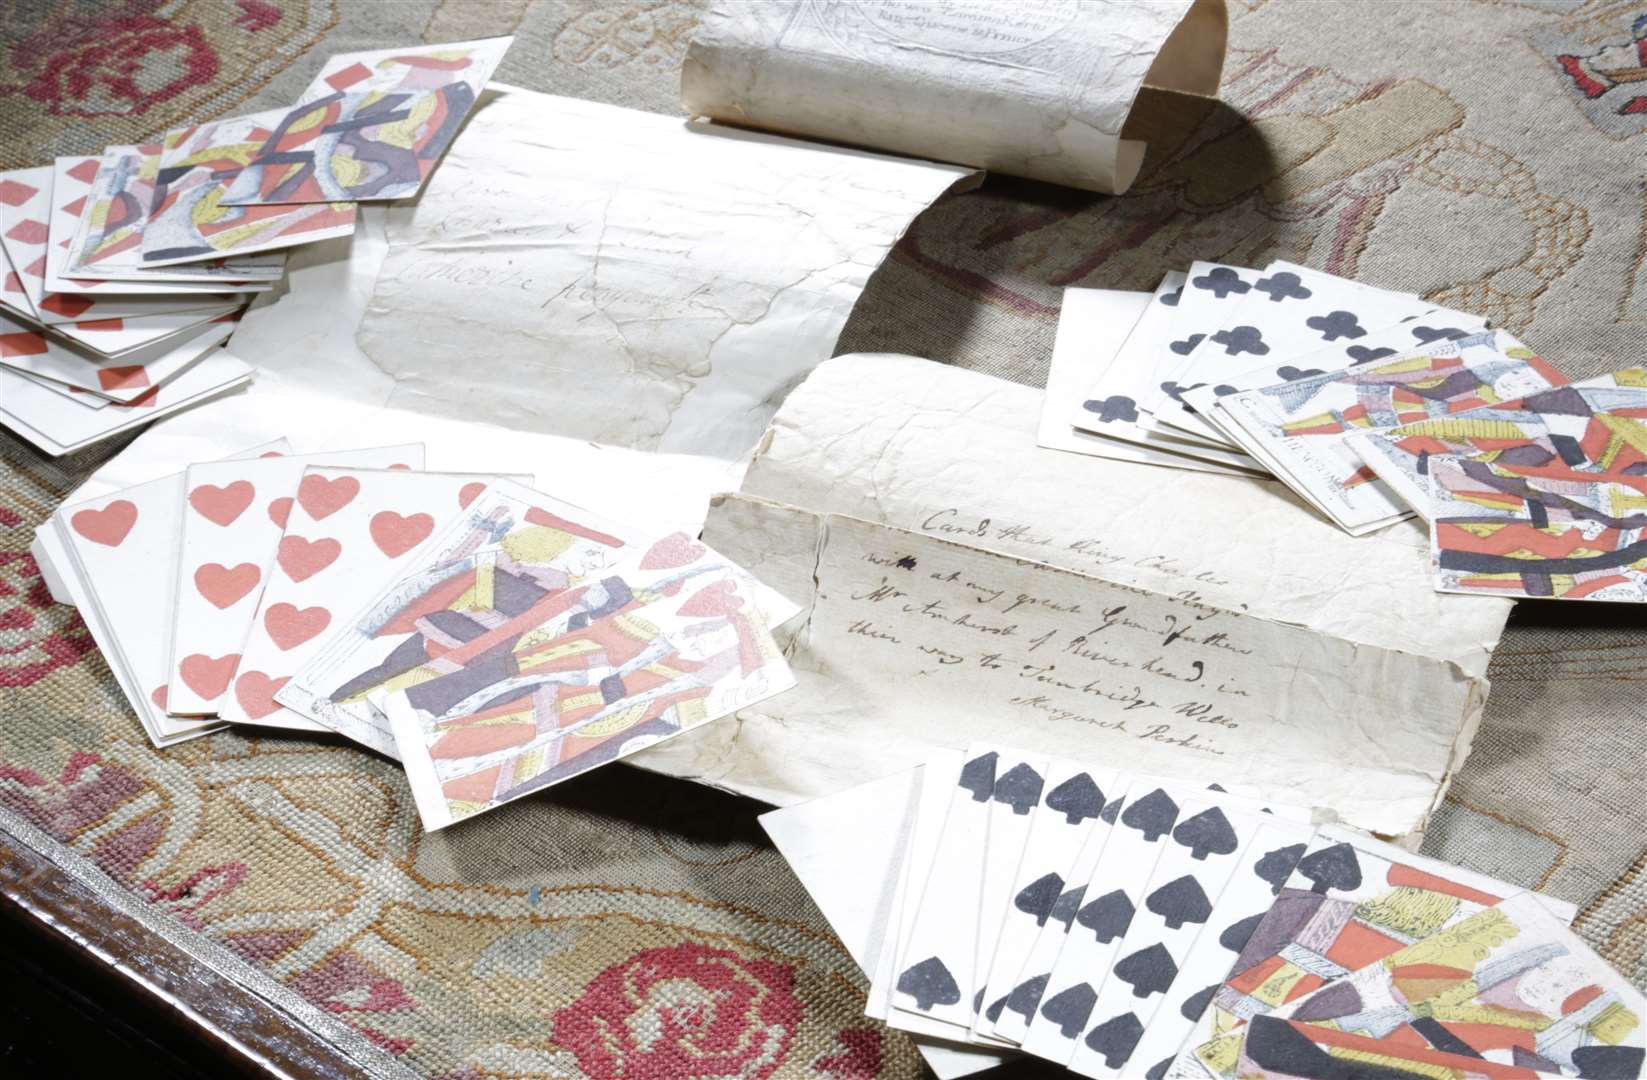 A note was found alongside the cards, connecting them to Sevenoaks and Tunbridge Wells. Picture: Woolley & Wallis